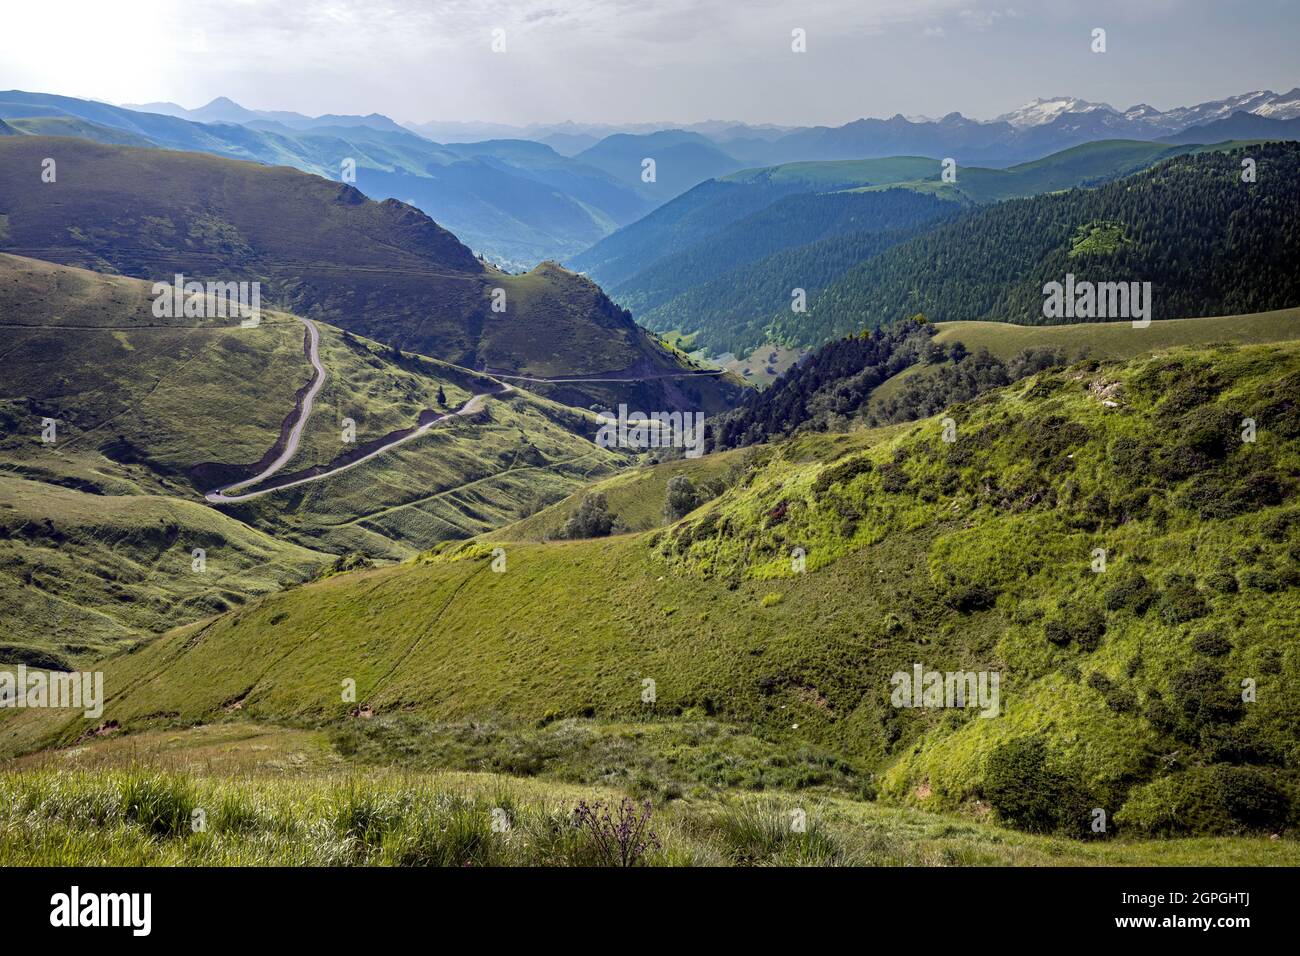 France, Haute Garonne, Pyrenees mountains, road used by the Tour de france to reach the Bales pass Stock Photo